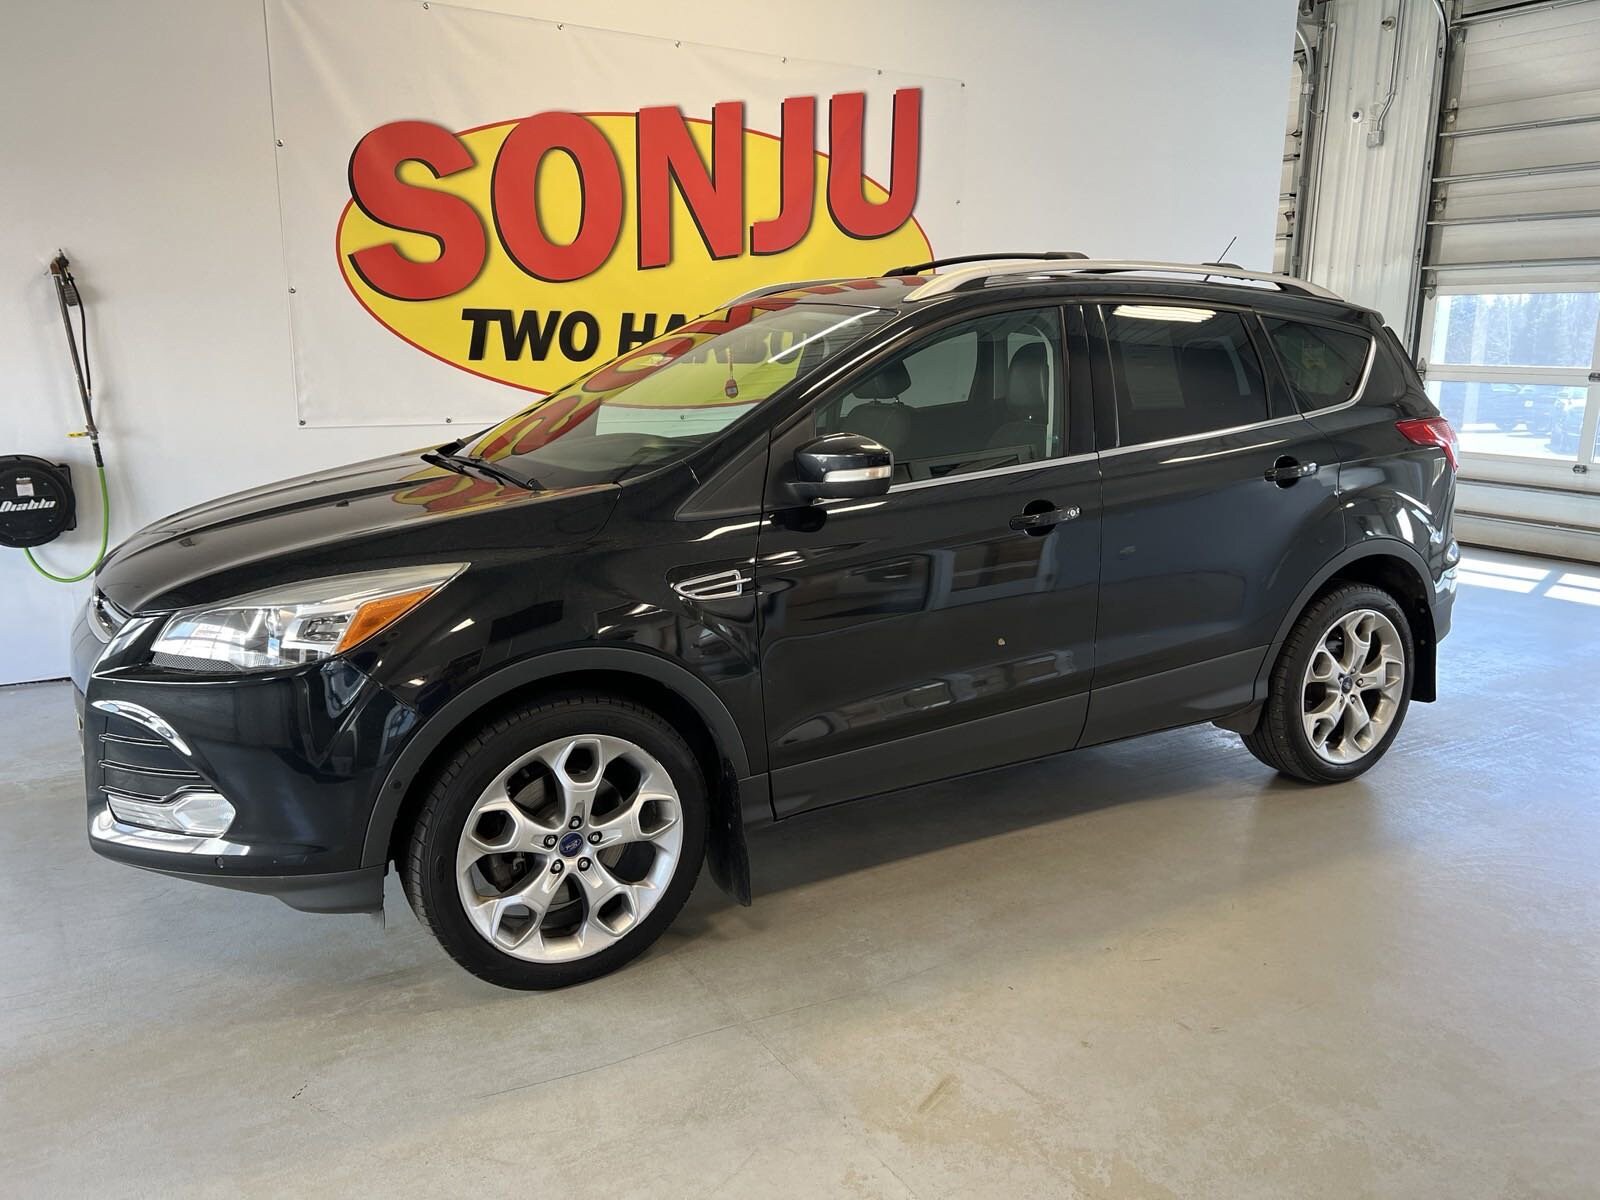 Used 2013 Ford Escape Titanium with VIN 1FMCU9J98DUA34121 for sale in Two Harbors, Minnesota